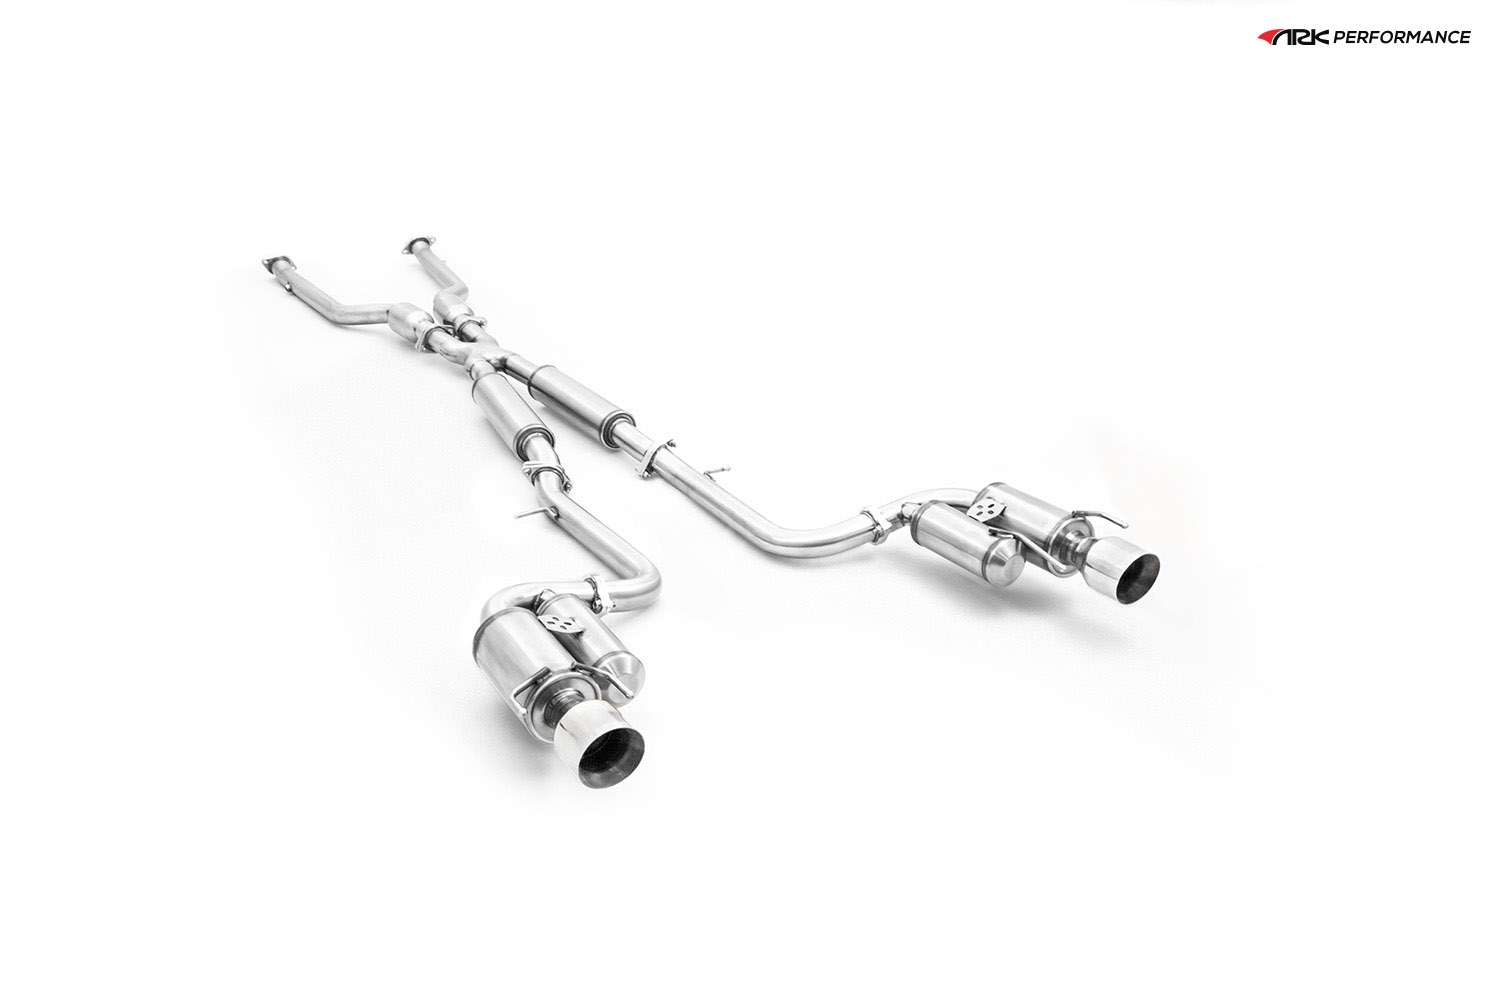 Ark Performance Stainless Steel GRiP Cat-Back Exhaust System 2.5in Pipe w/ 4.5 Polished Single Tip, Dual Exit - Lexus IS 250 / 300 / 350 AWD 14-16 2.5L V6, 3.5L V6 GSE35 / GSE36 / GSE37